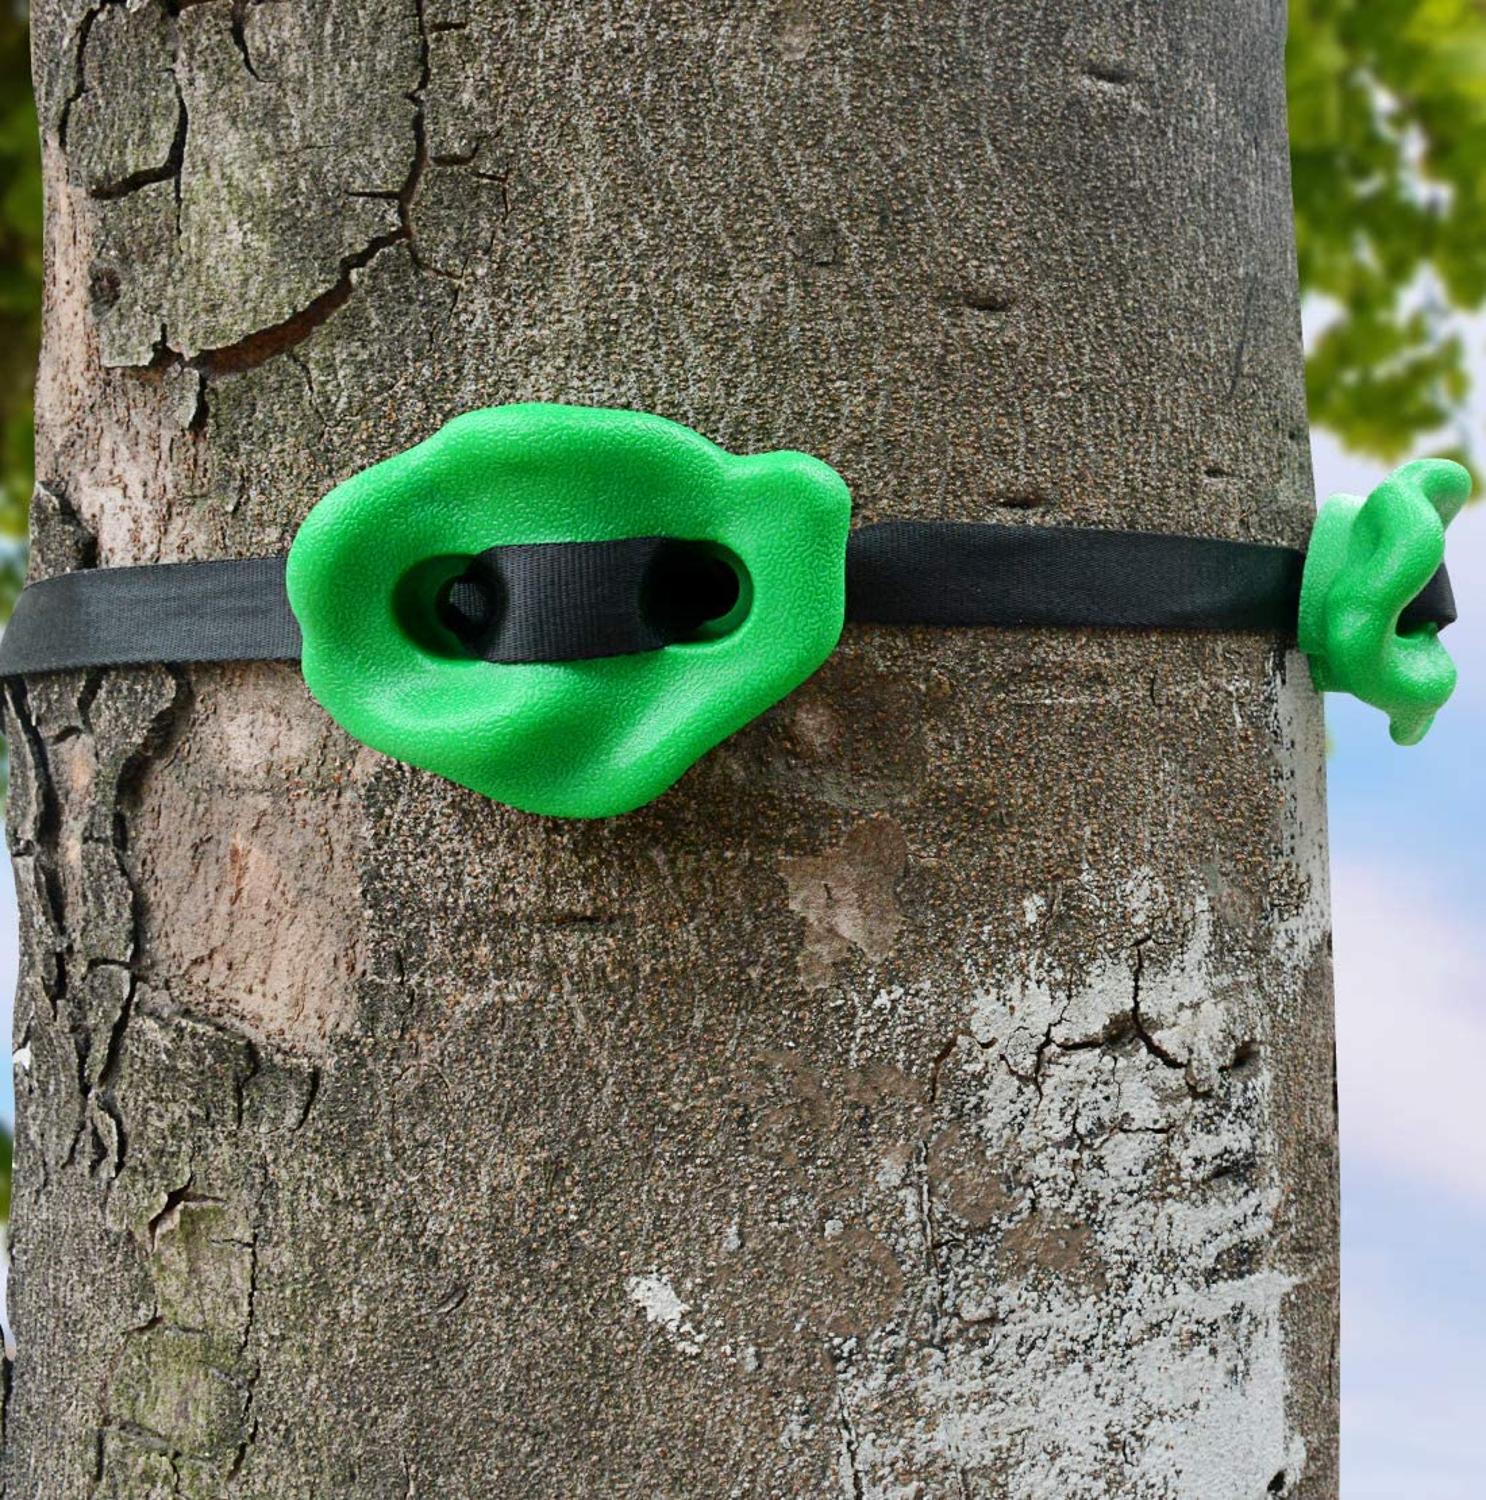 12 Ninja Tree Climbing Holds for Kids Climber, Adult Climbing Rocks with 6 Ratchet Straps for Outdoor